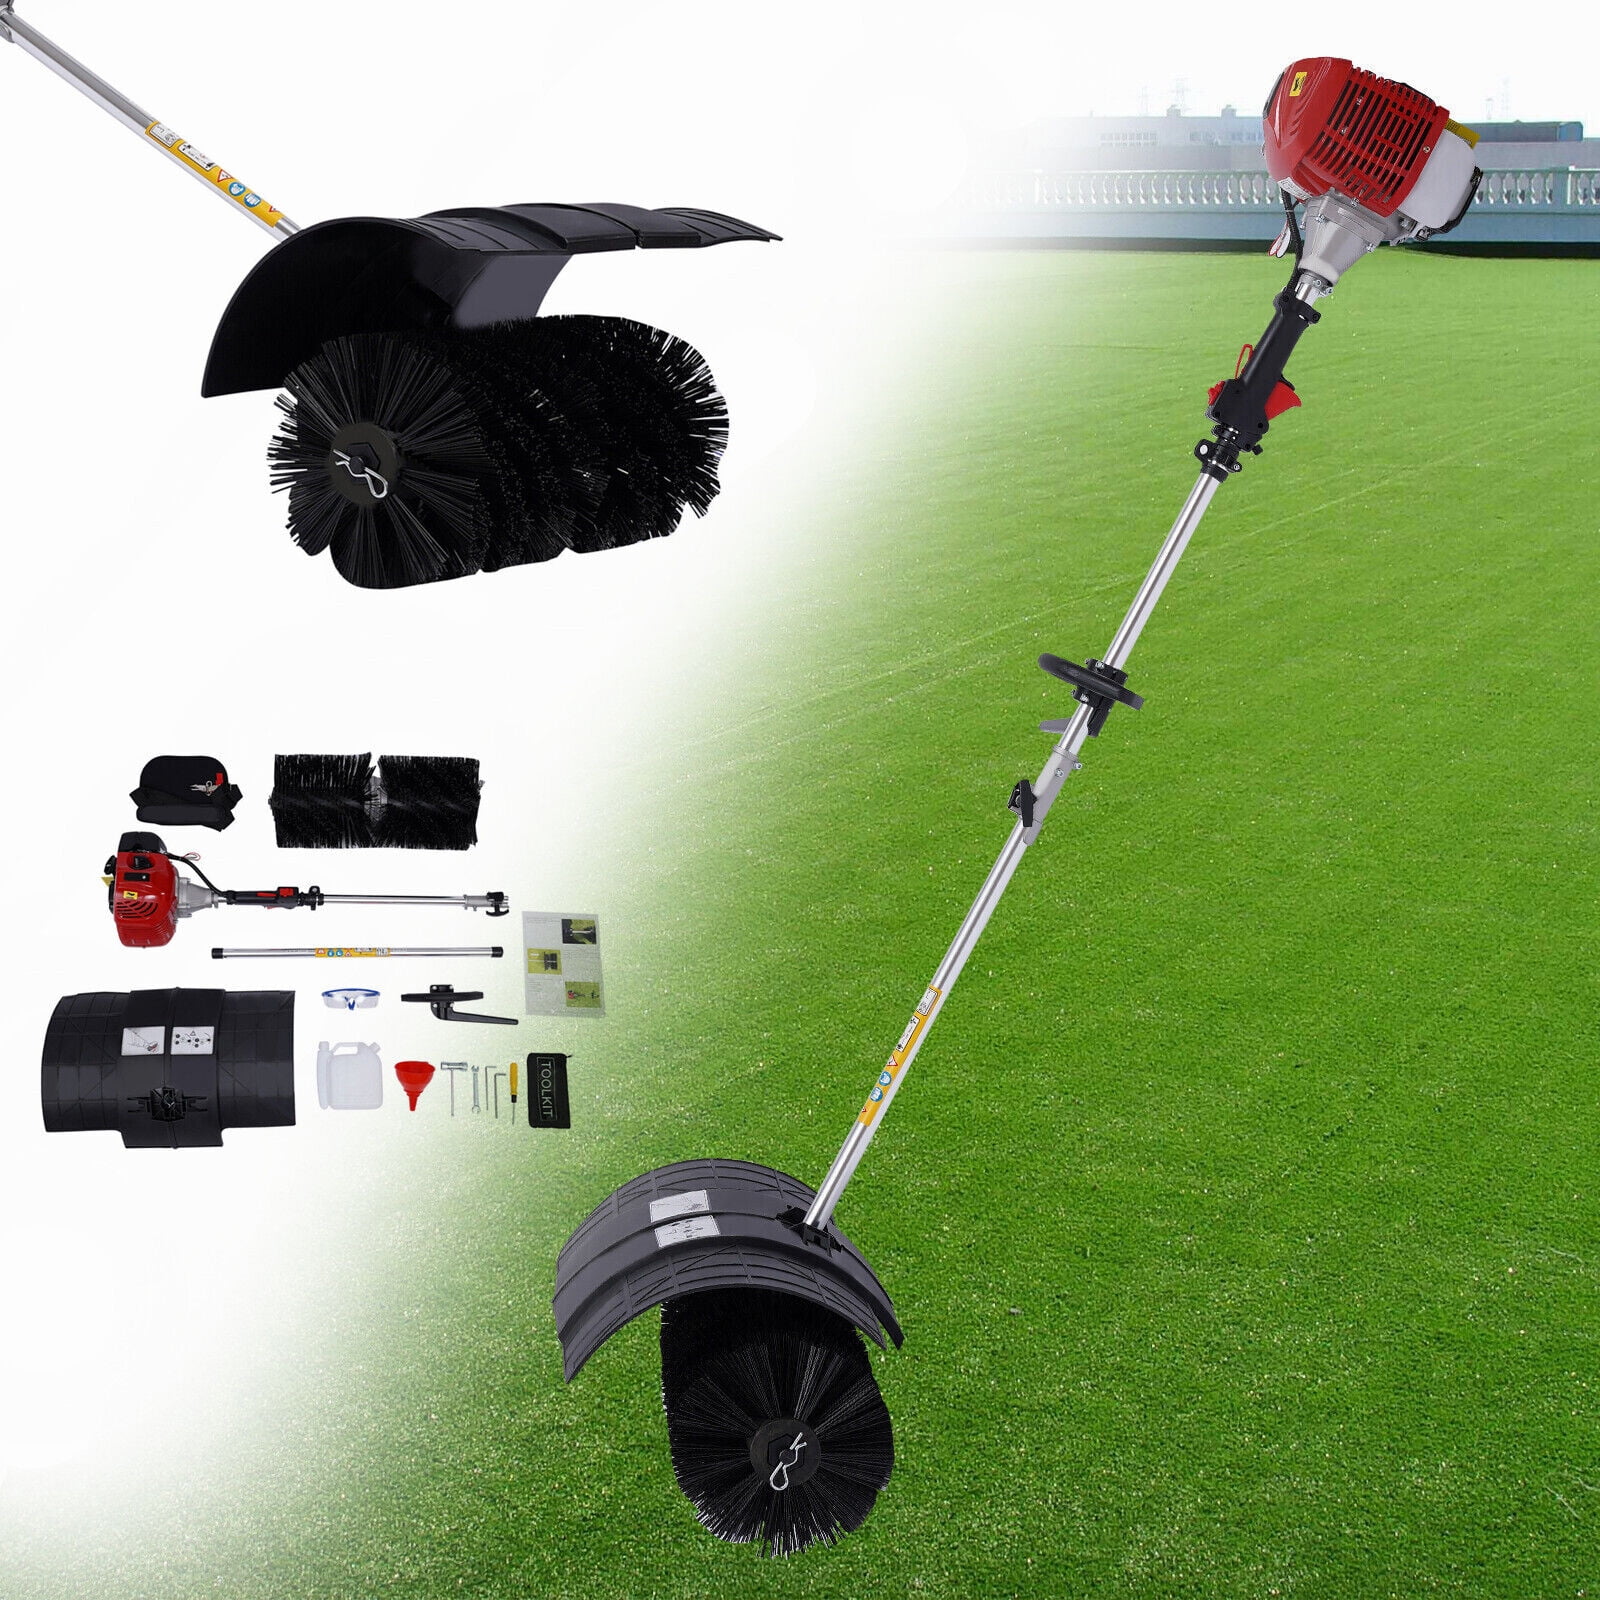 DE 2Stroke 52cc Gas Power Sweeper Hand Held Broom Cleaning Driveway Turf Grass 